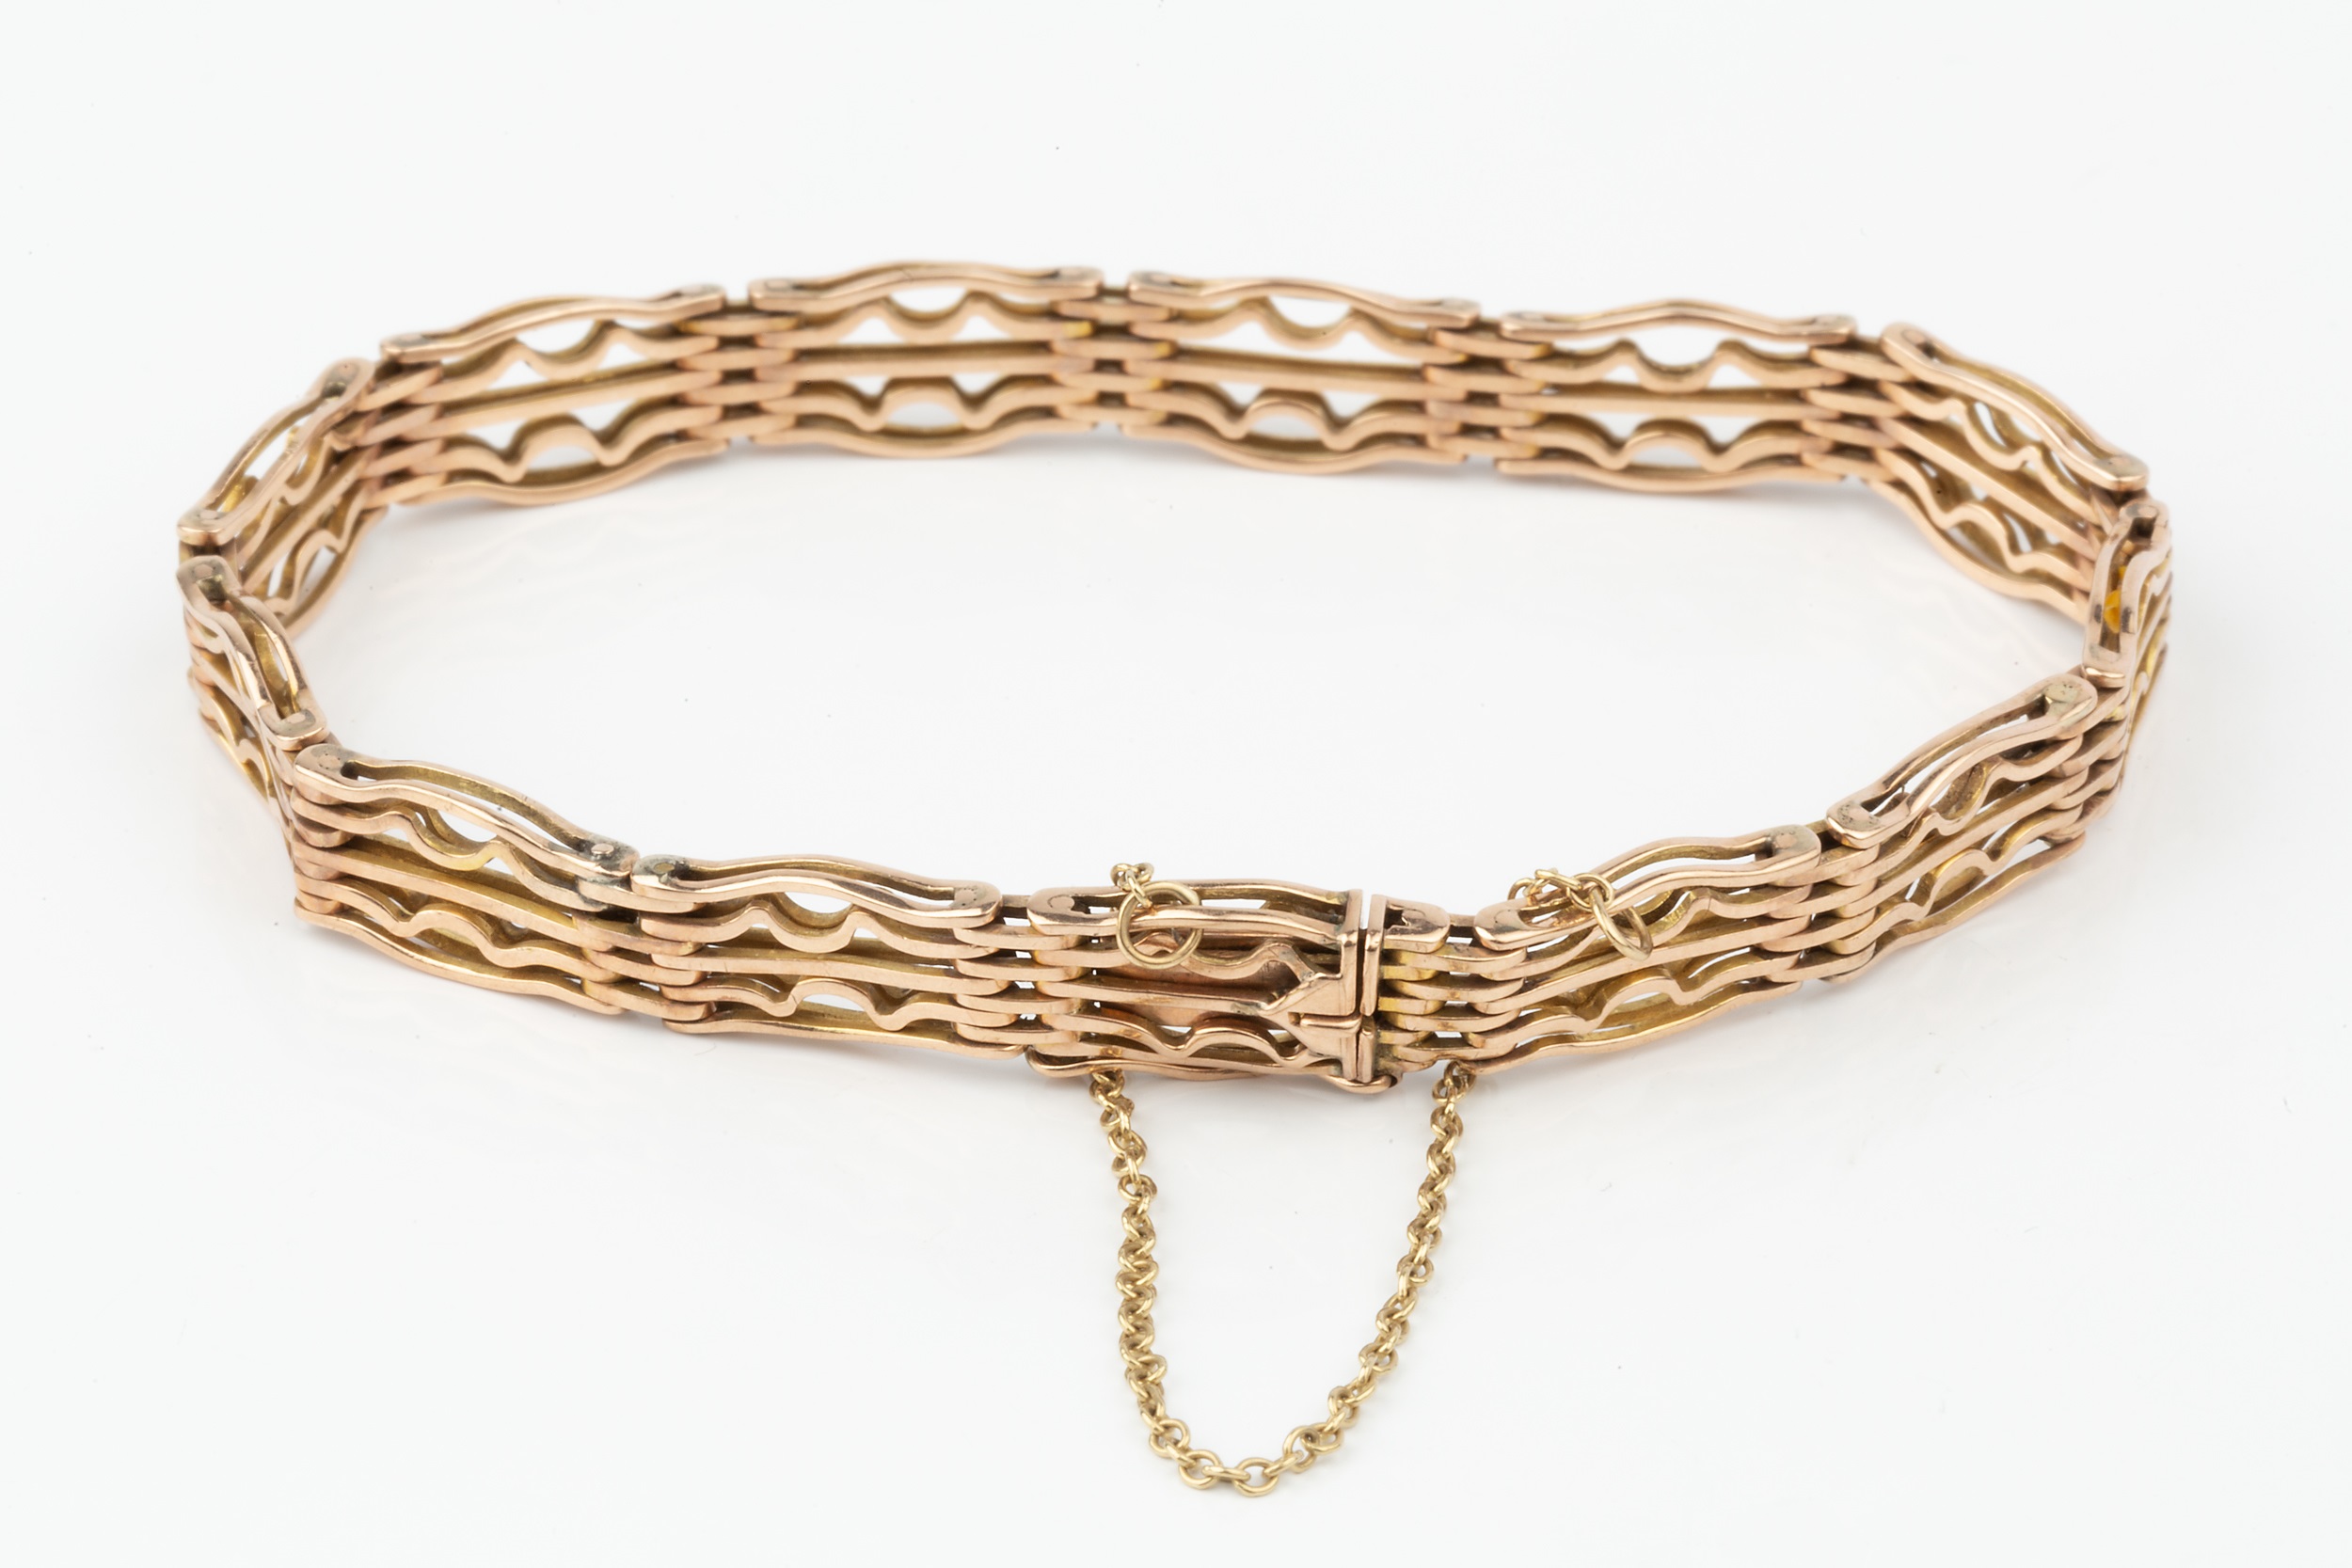 A 9ct gold gatelink bracelet, the links of shaped and wavy rectangular design, 19cm long approx - Image 2 of 2